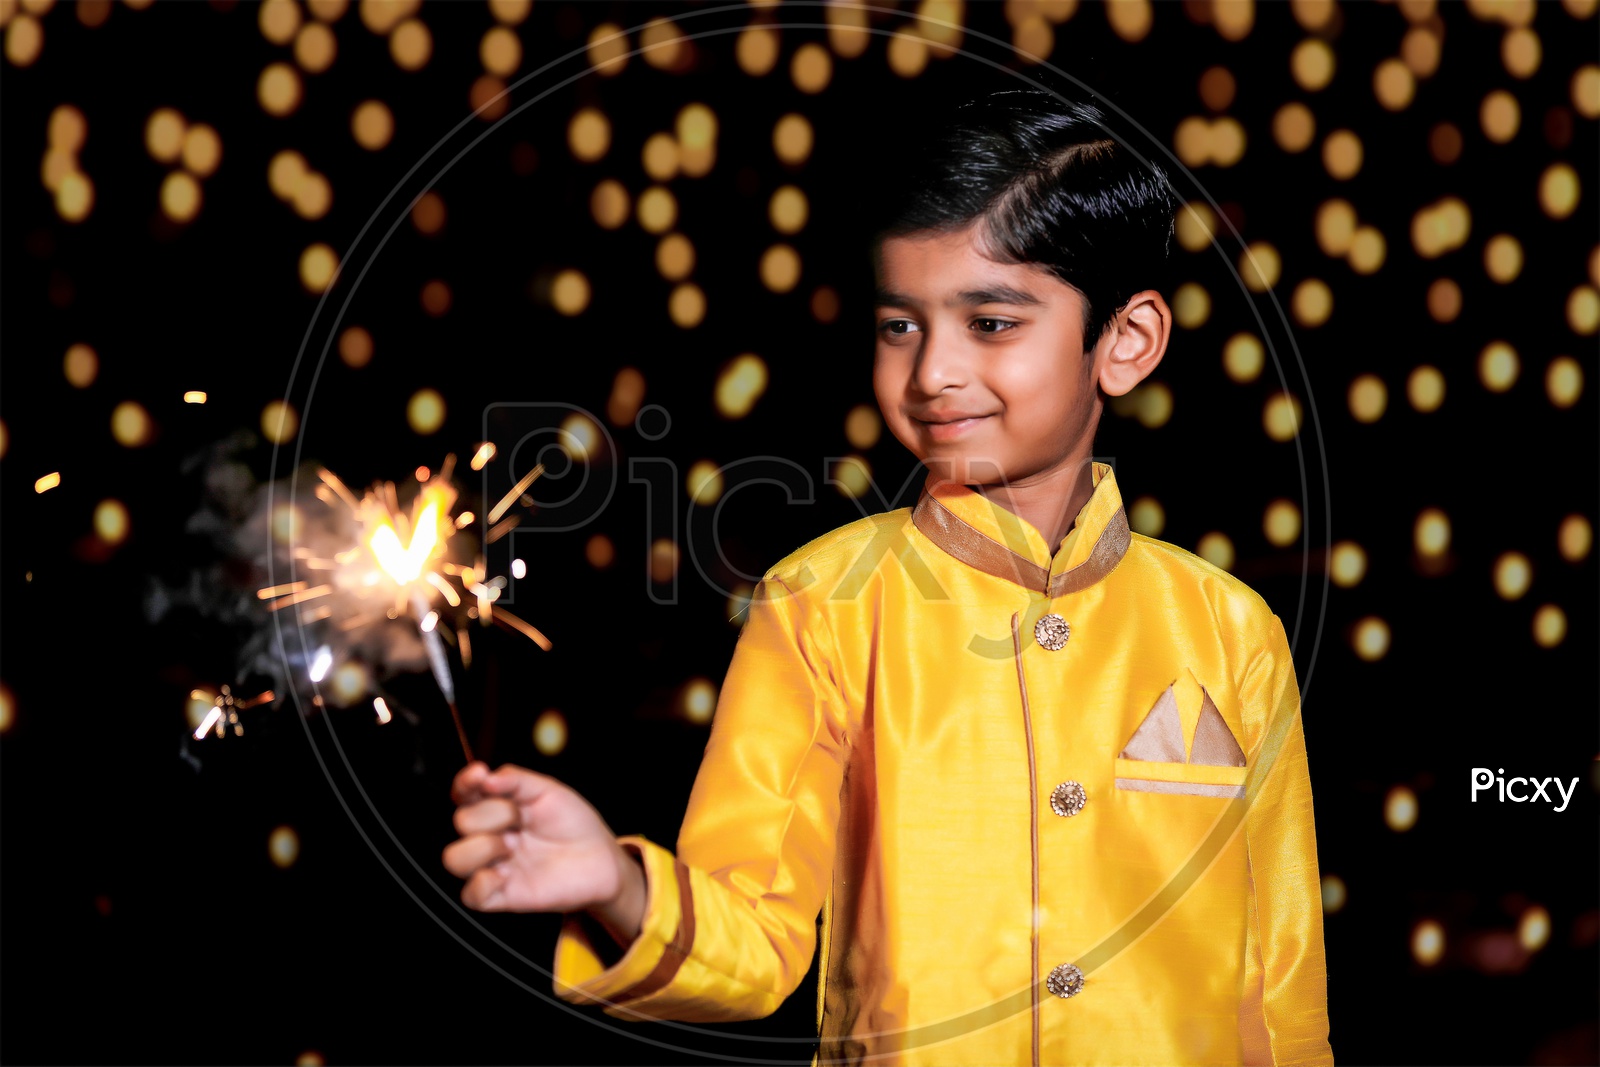 Indian Boy Or  Kid Celebrating Diwali Festival with Crackers